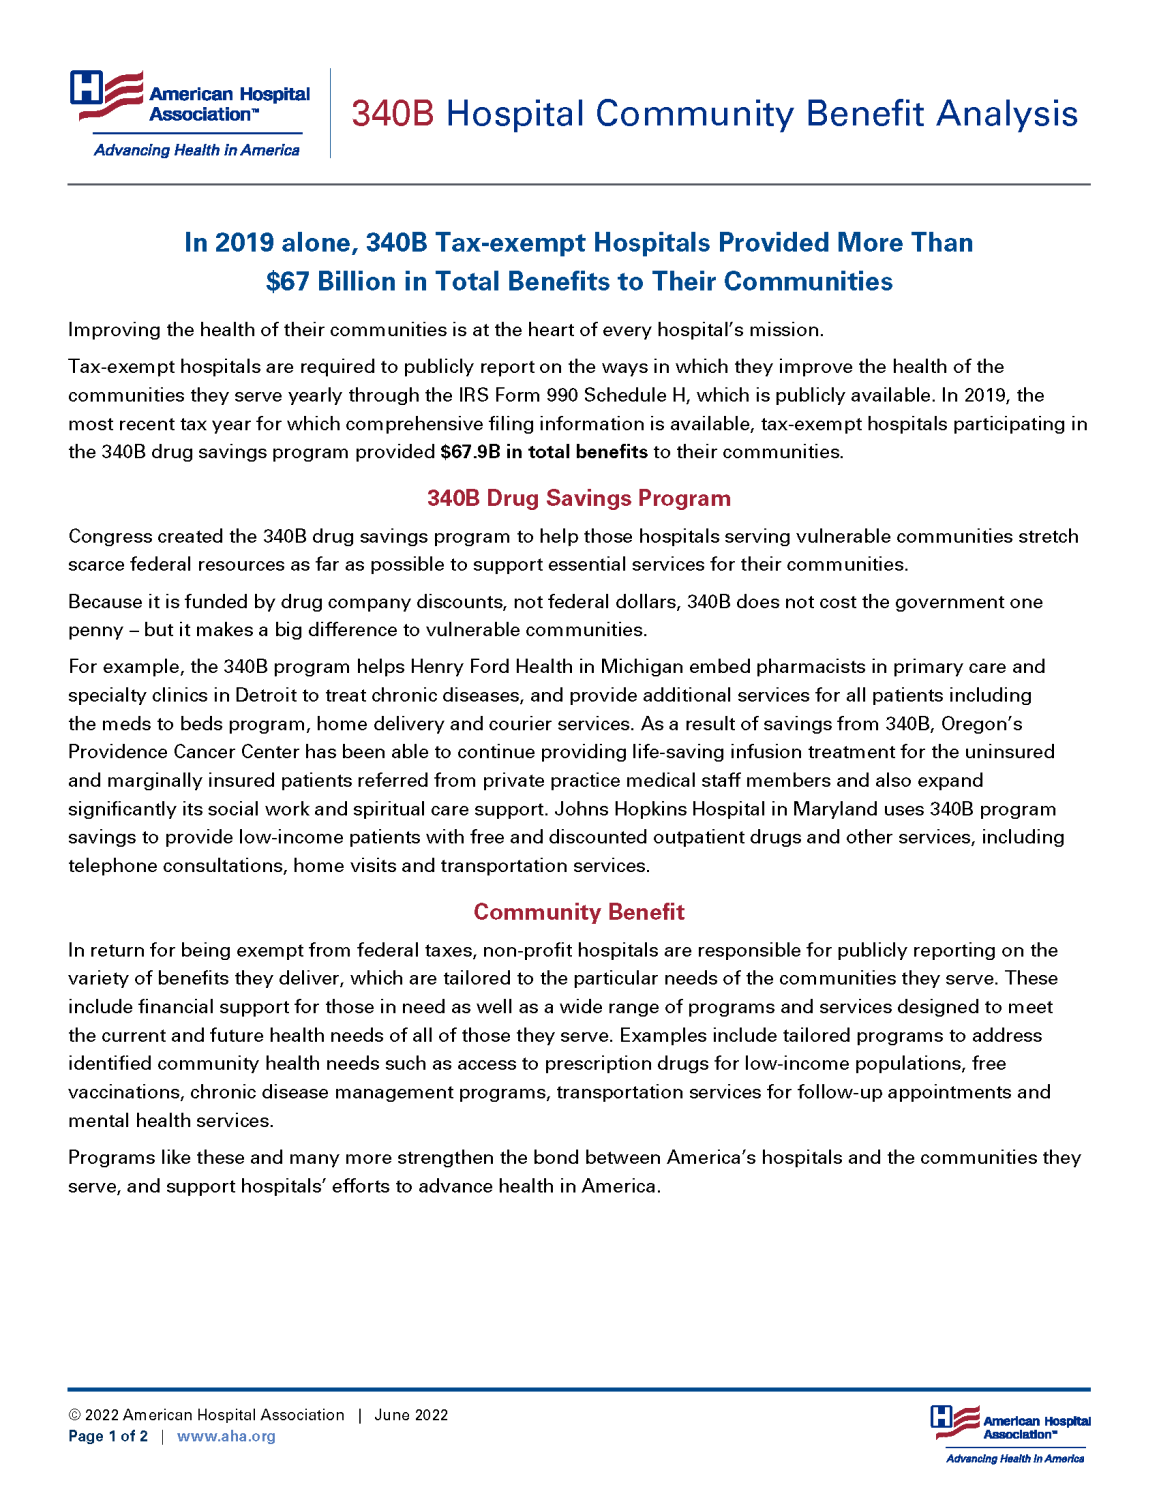 First page of 340B Hospital Community Benefit Analysis 